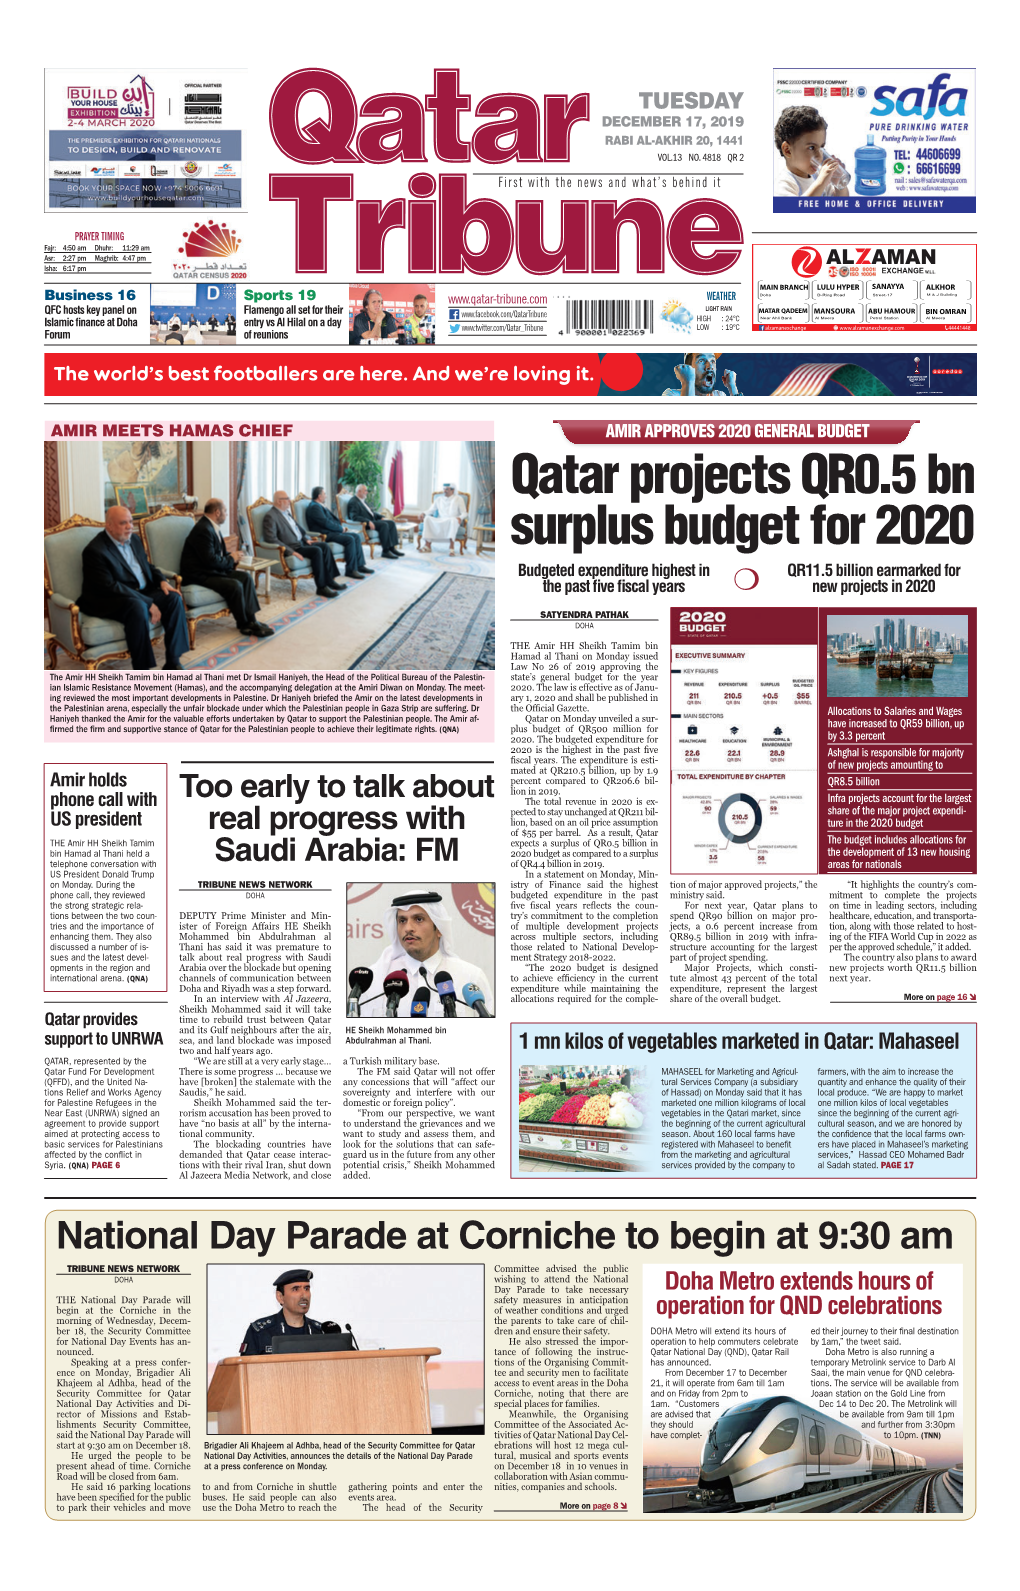 Qatar Projects QR0.5 Bn Surplus Budget for 2020 Budgeted Expenditure Highest in QR11.5 Billion Earmarked for the Past Five Fiscal Years New Projects in 2020